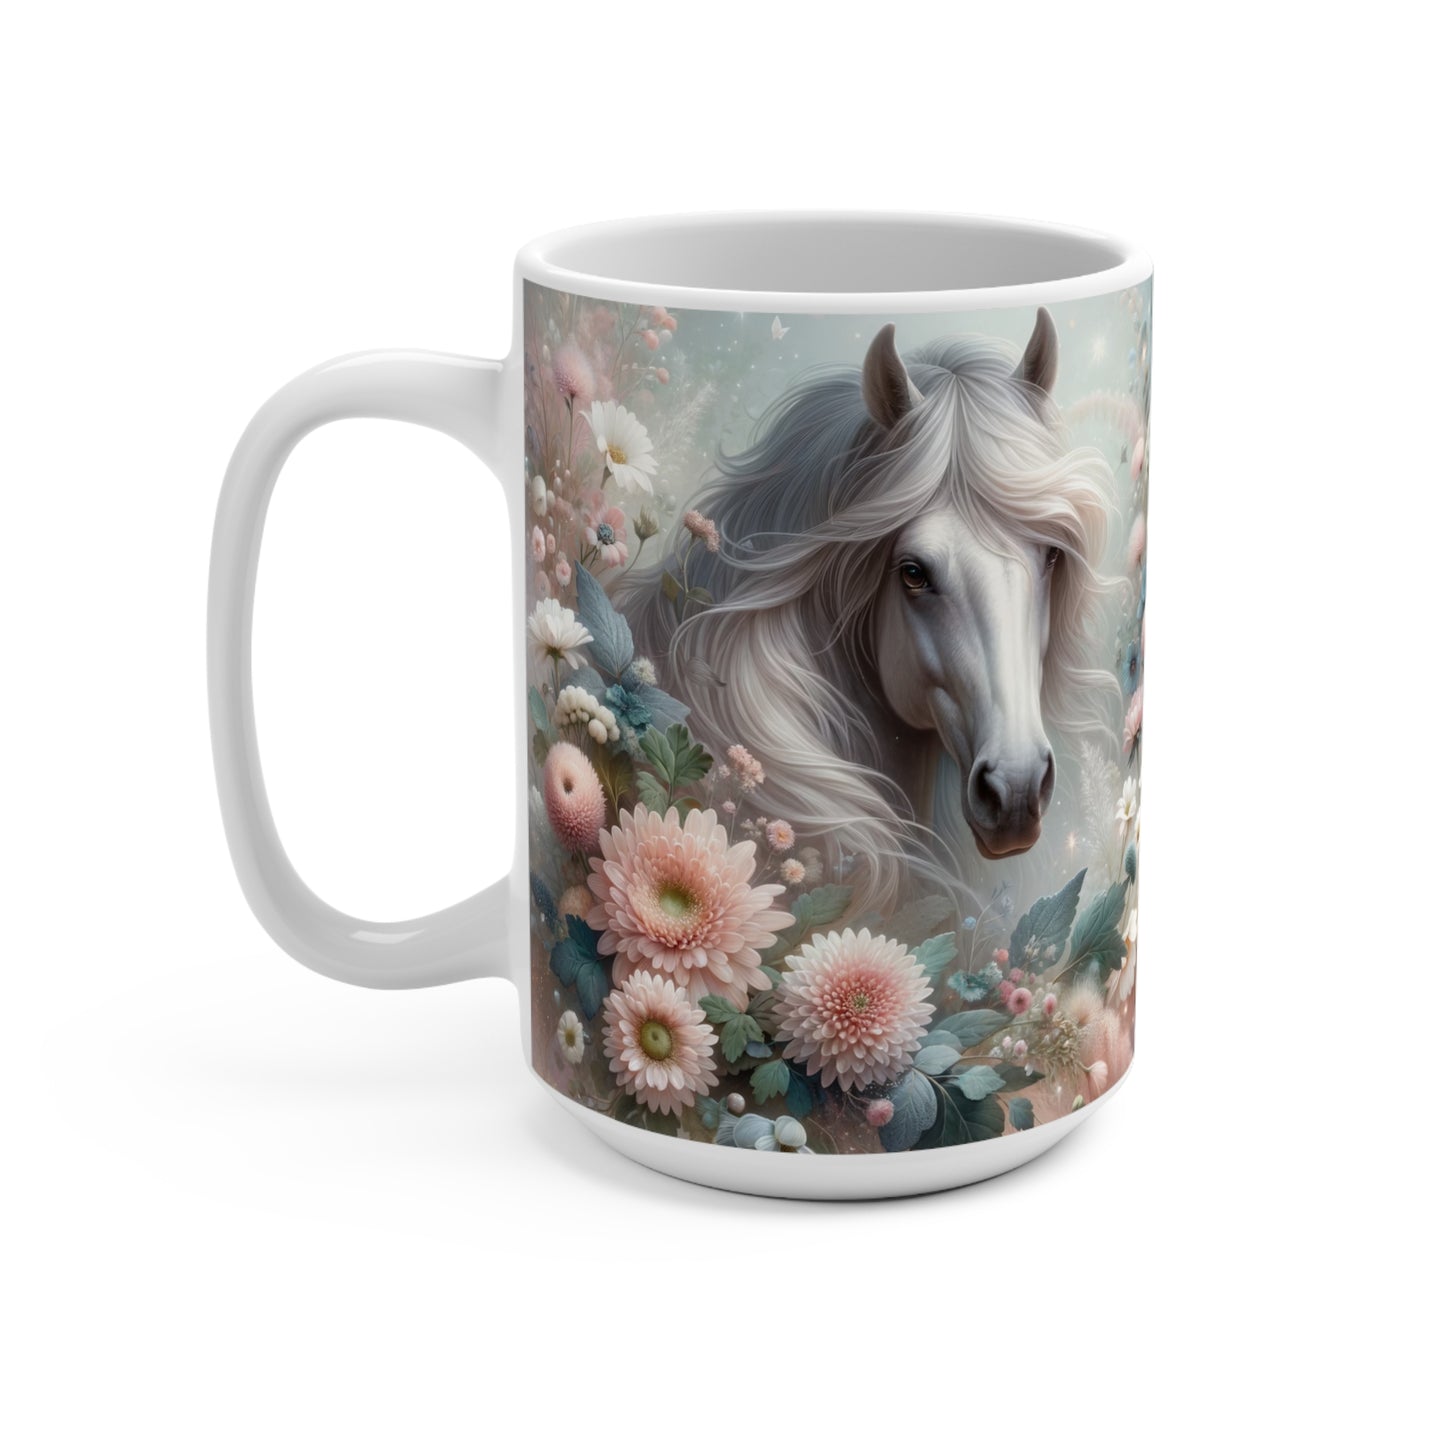 Floral Horse Mug, Enchanted Animal Coffee Cup, Fantasy Equine Art, Gift for Horse Lovers, Dainty Flowers Design, Unique Drinkware, Unique Gift Idea, Mug 15oz